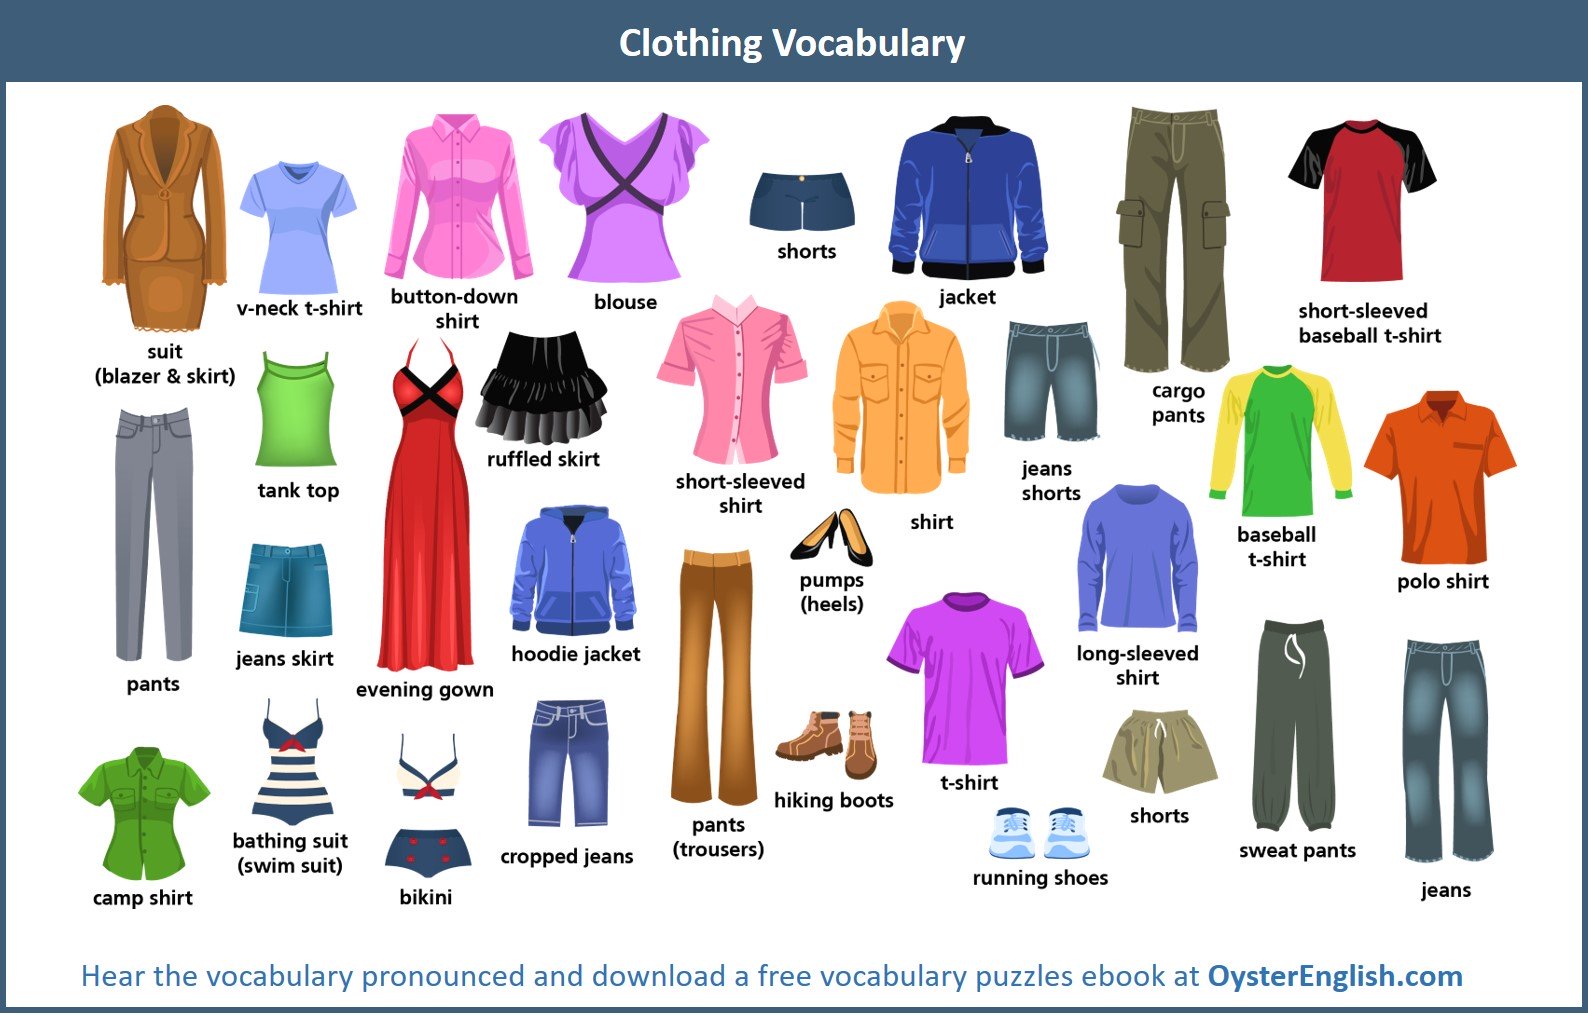 Reviewing and adding to clothes and fashion vocabulary план урока 7 класс